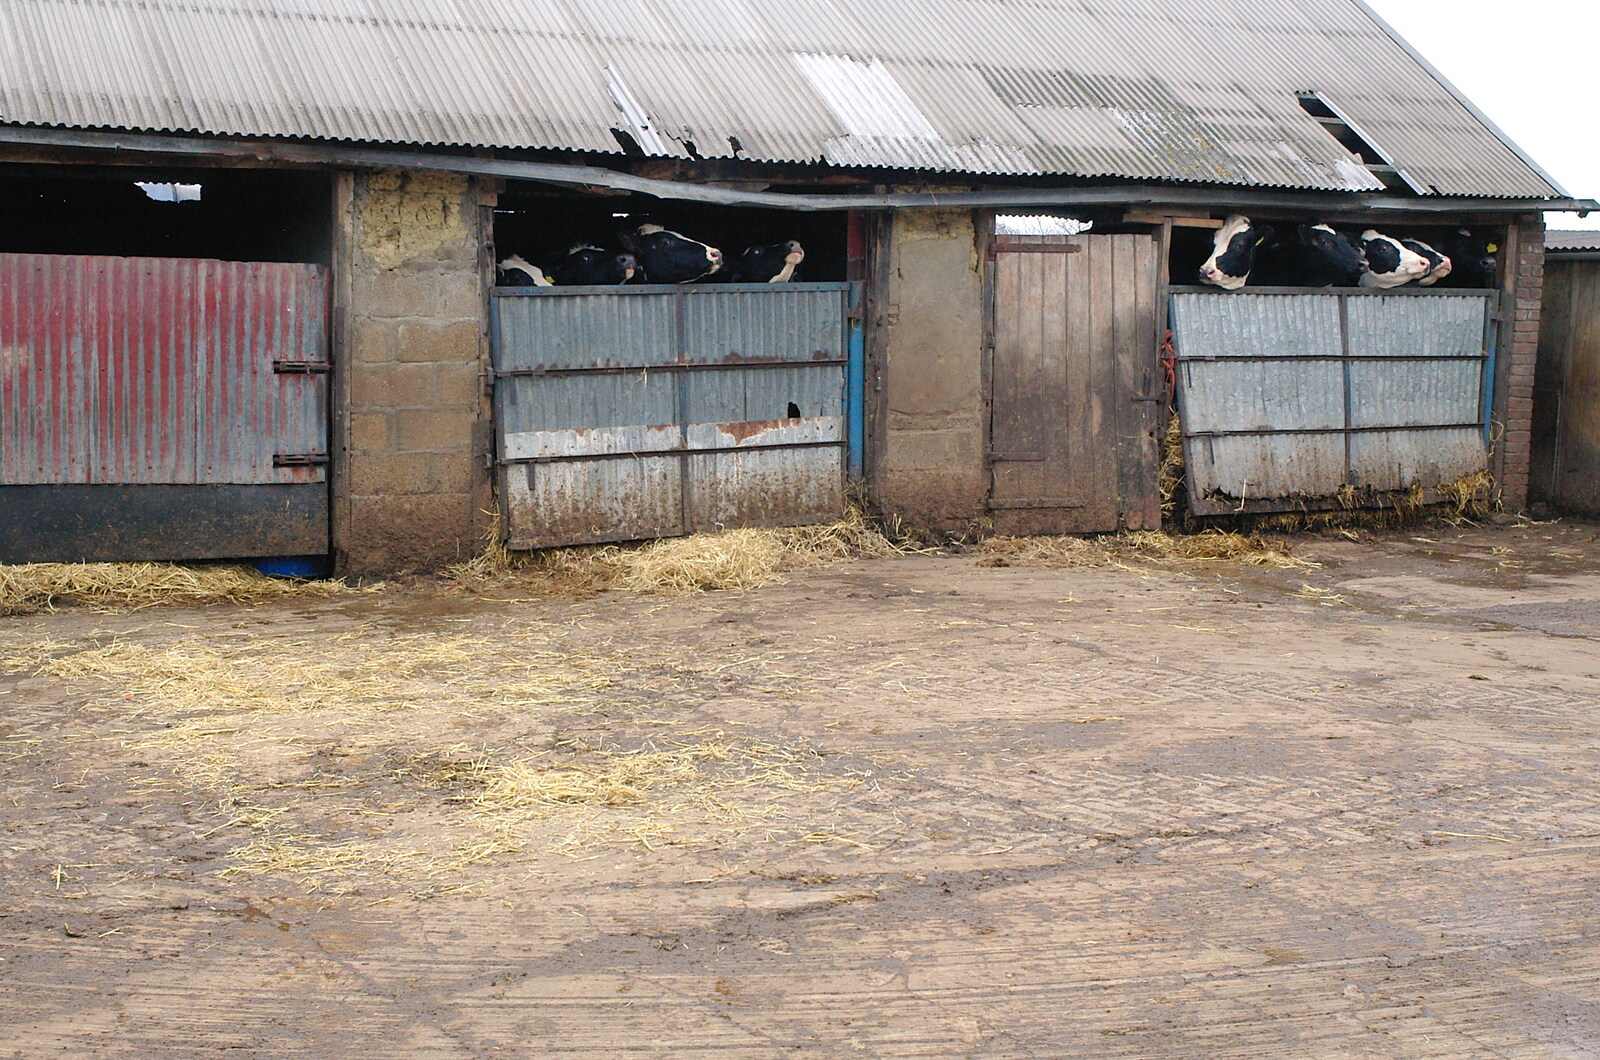 The cows are raring to go from Wavy and the Milking Room, Dairy Farm, Thrandeston, Suffolk - 28th March 2005